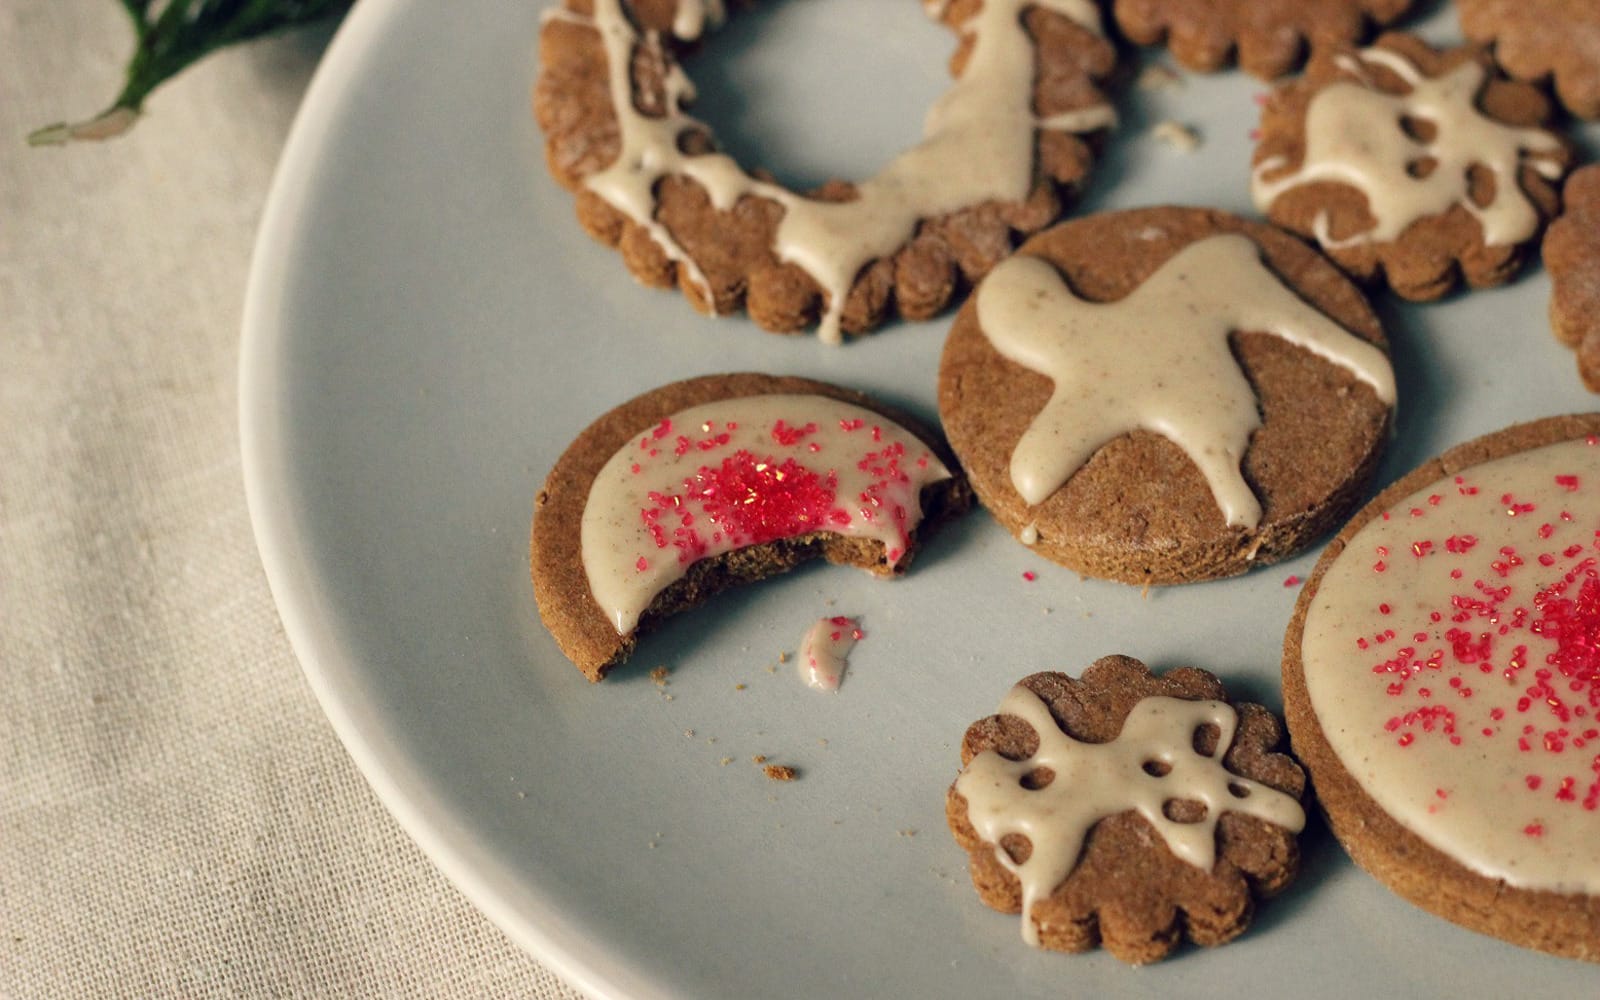 Gingerbread Cut-Outs With Cardamom Vanilla Glaze